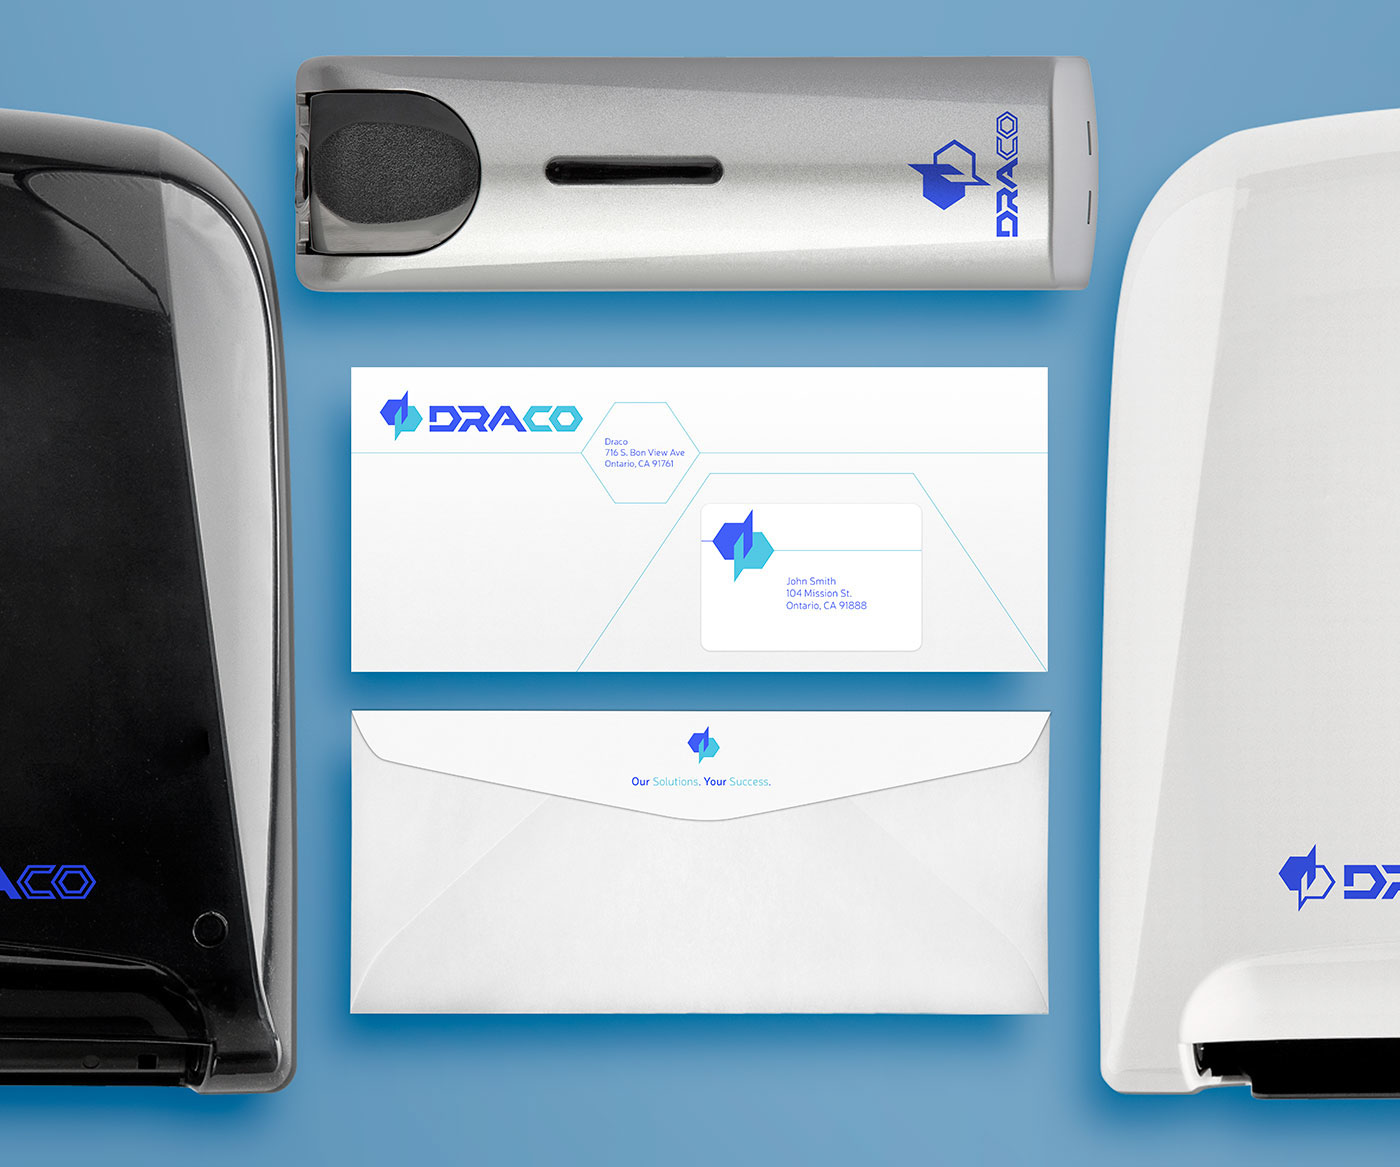 hygienic products soap soap dispensers Paper towels clean logos brand visual identity wordmark custom type custom font icons